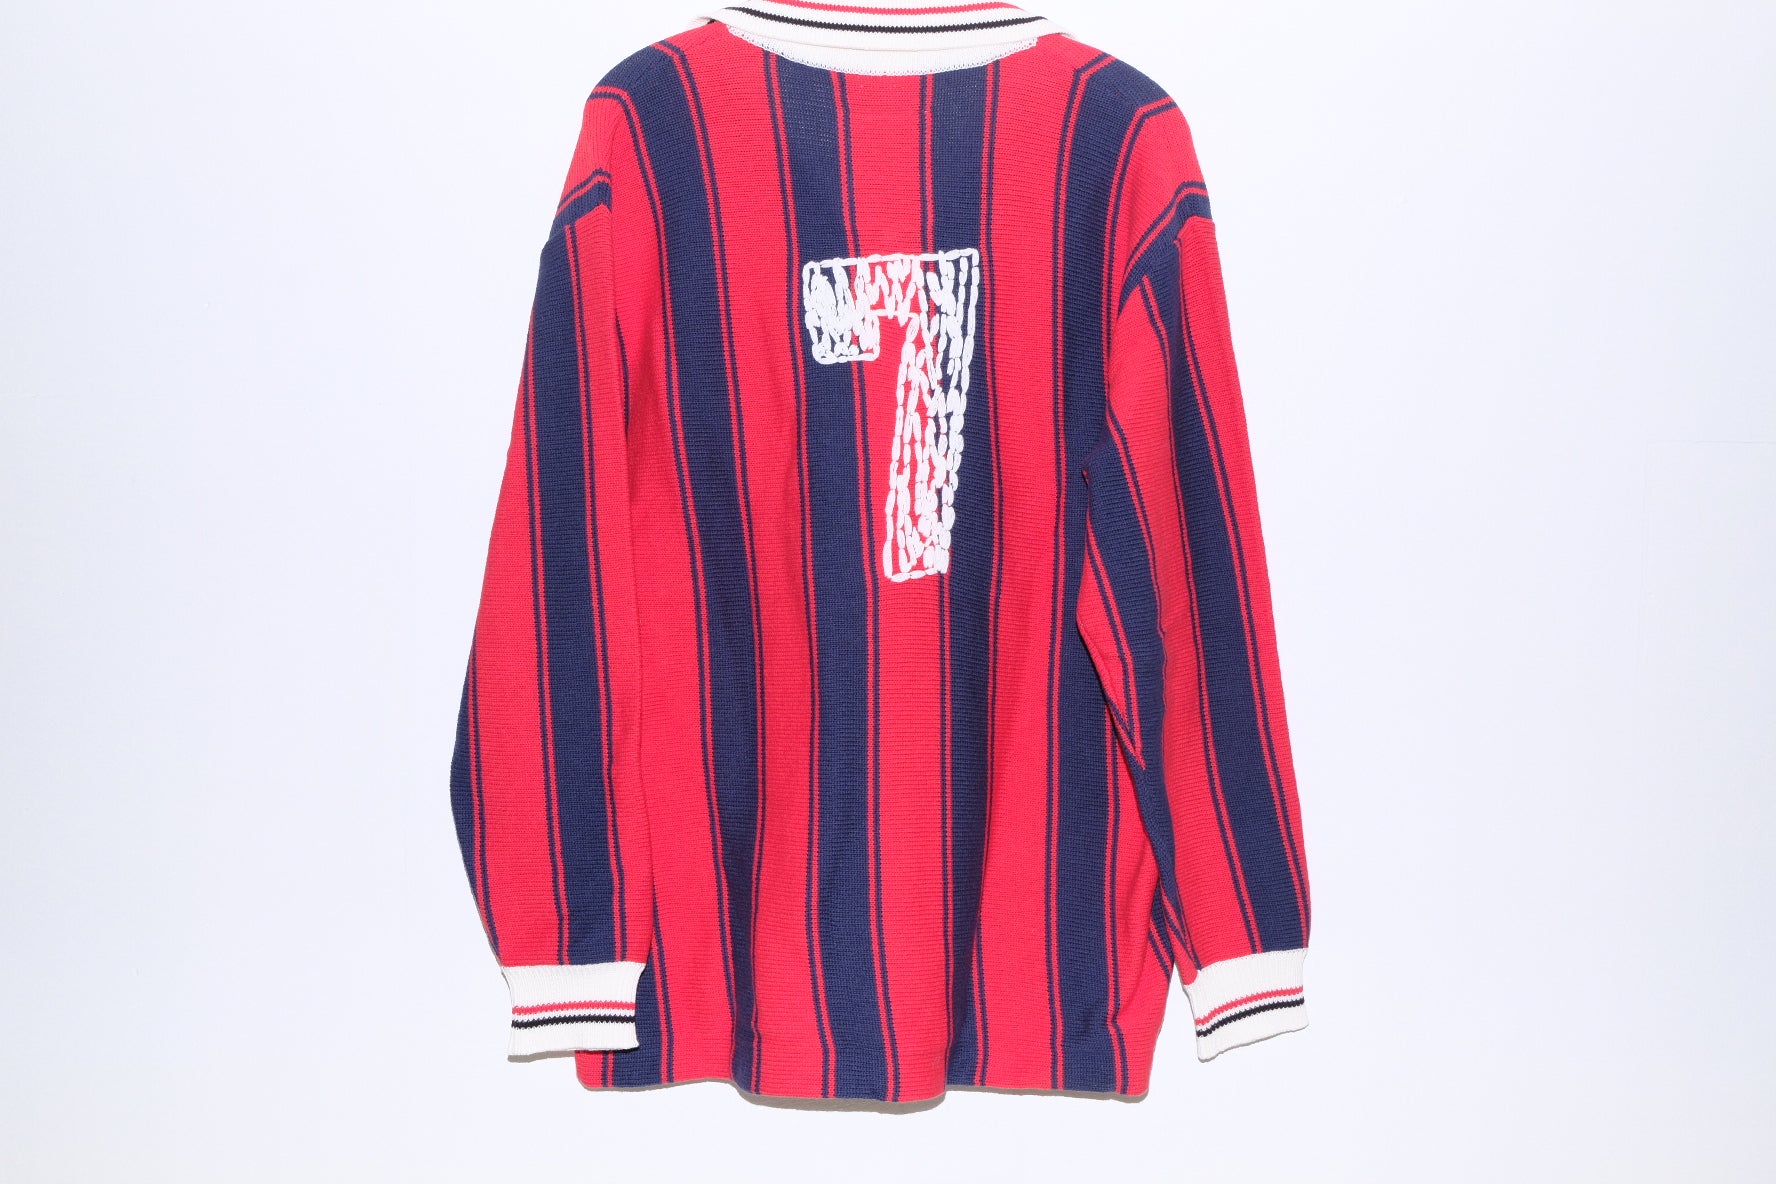 knitting long sleeve soccer jersey in red